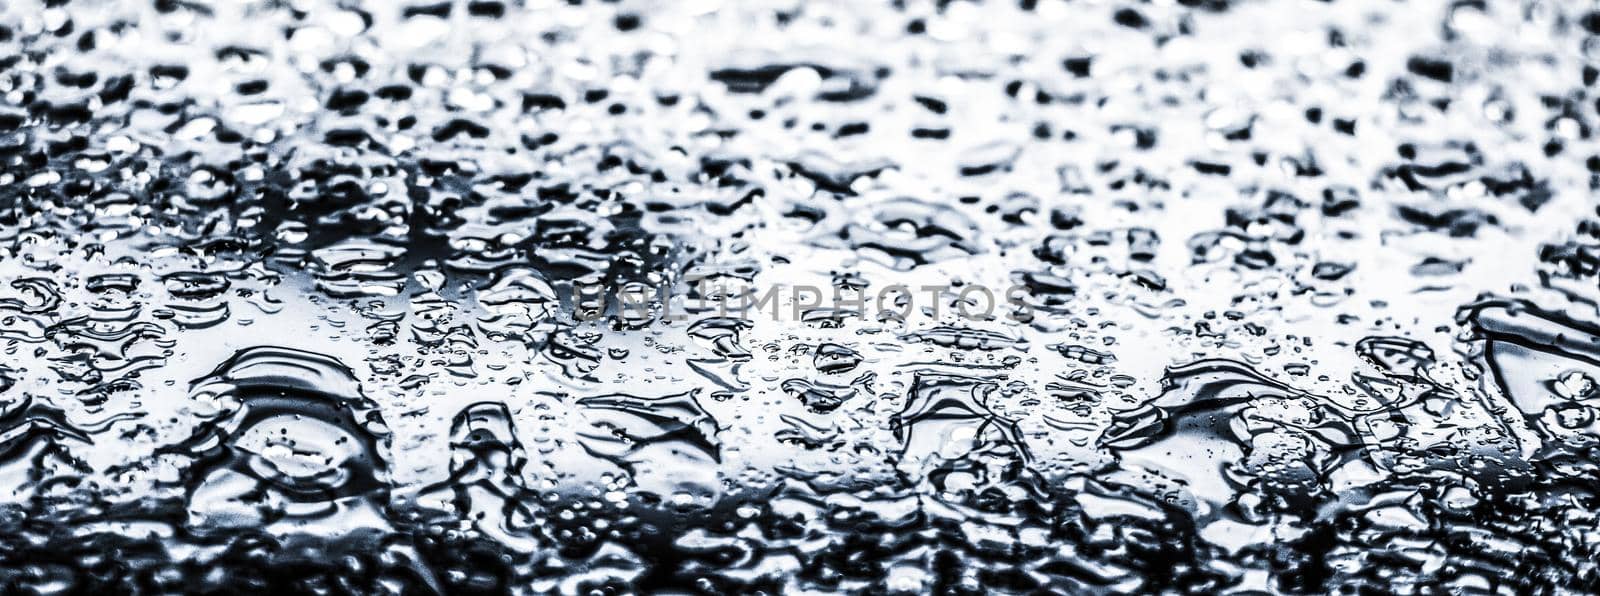 Water texture abstract background, aqua drops on silver glass as science macro element, rainy weather and nature surface art backdrop for environmental brand design by Anneleven